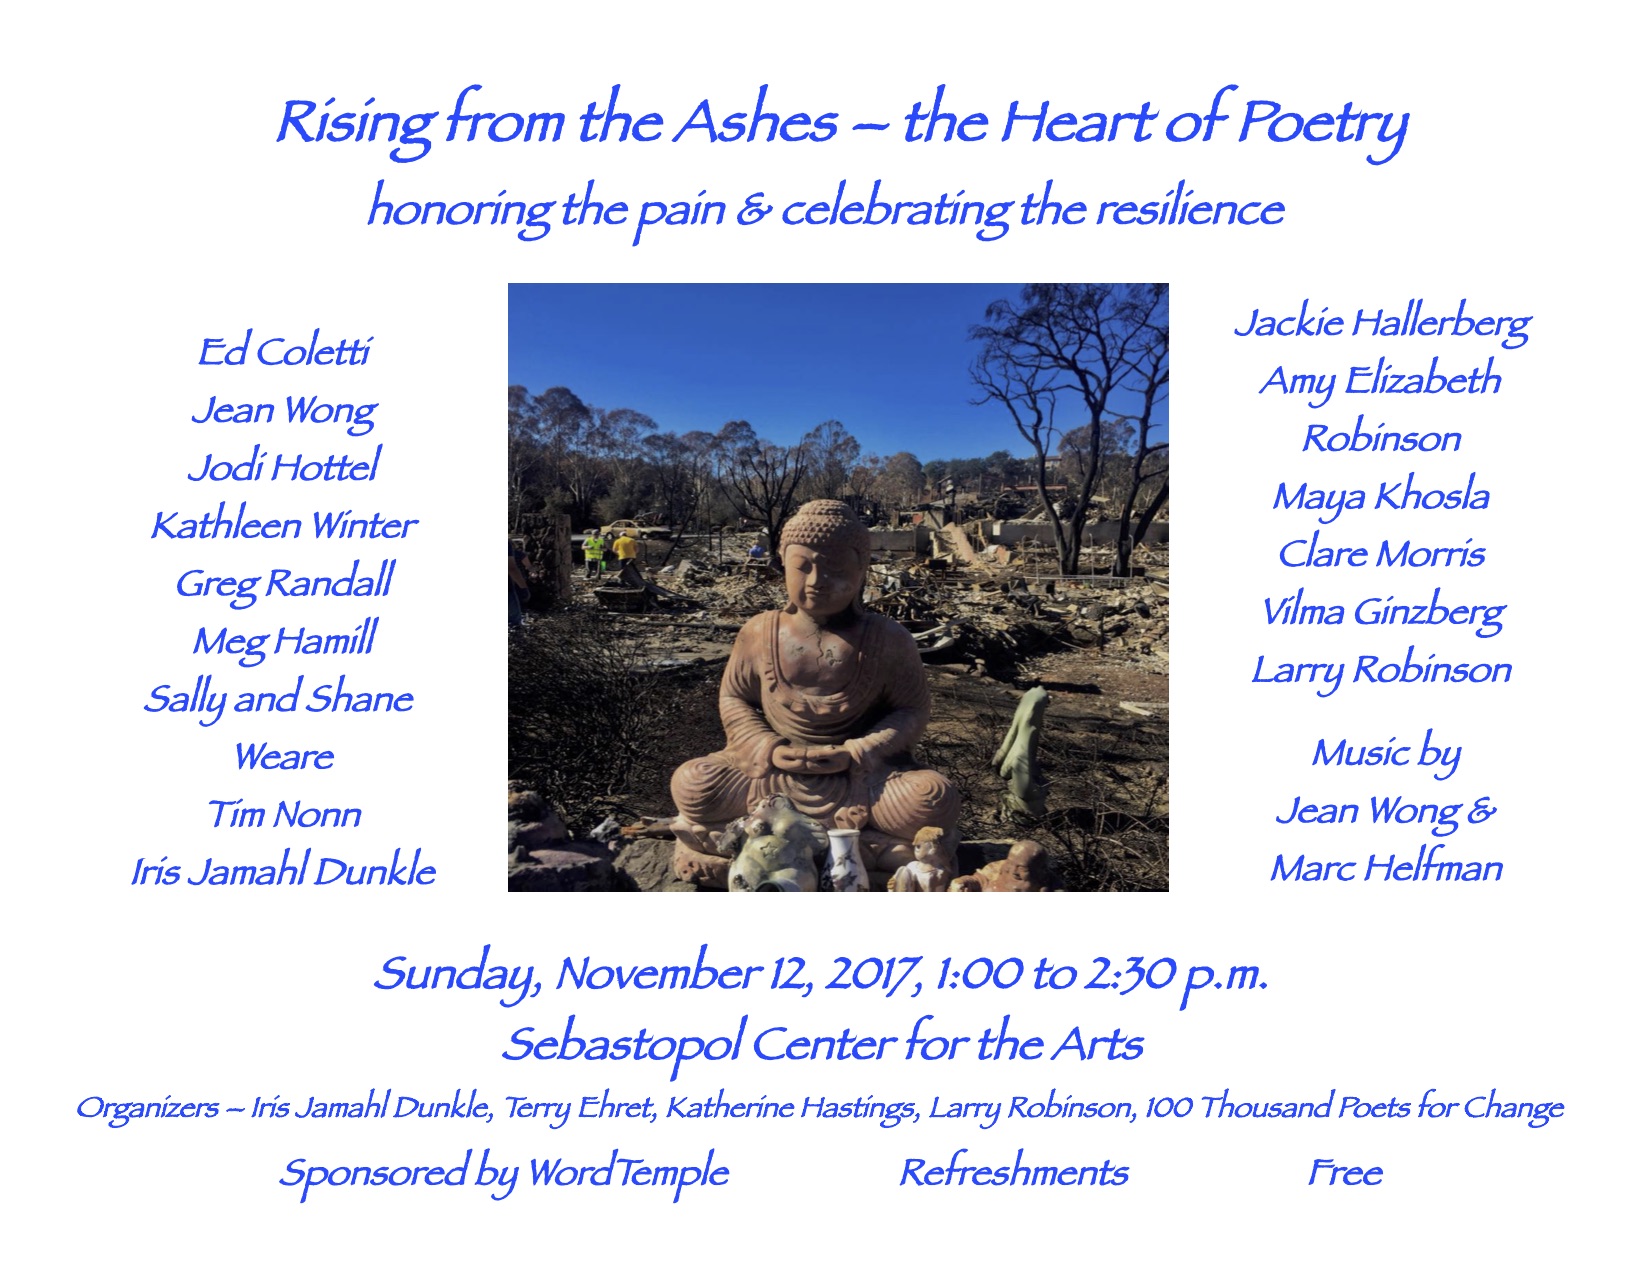 Rising from the Ashes Poetry - the Heart of Poetry, Sebastoipol Center for the Arts Event